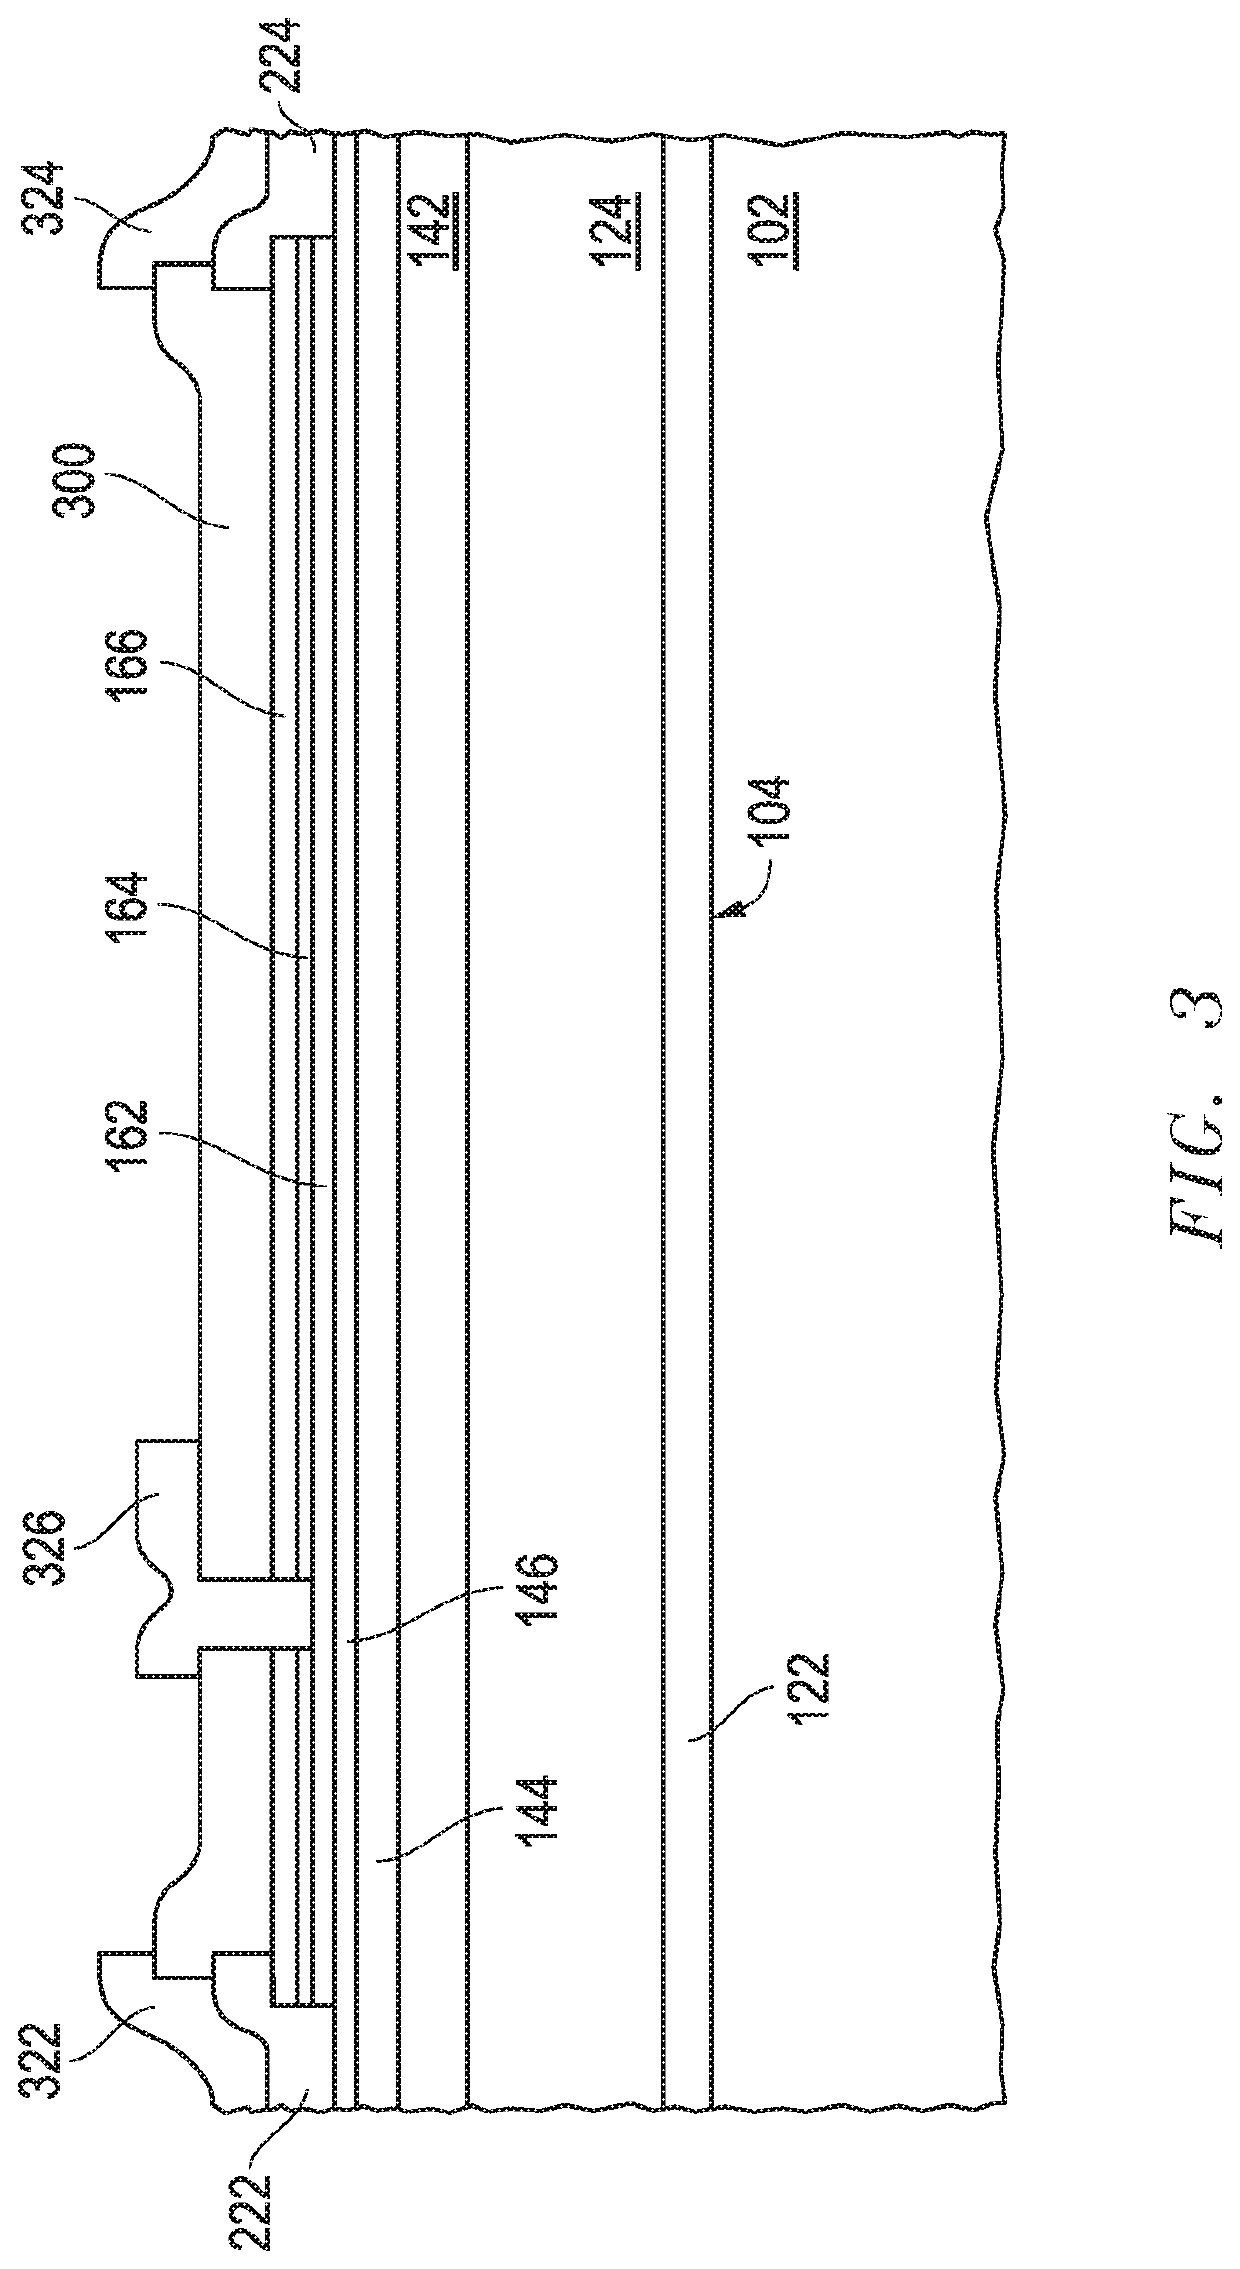 Process of forming an electronic device including a transistor structure